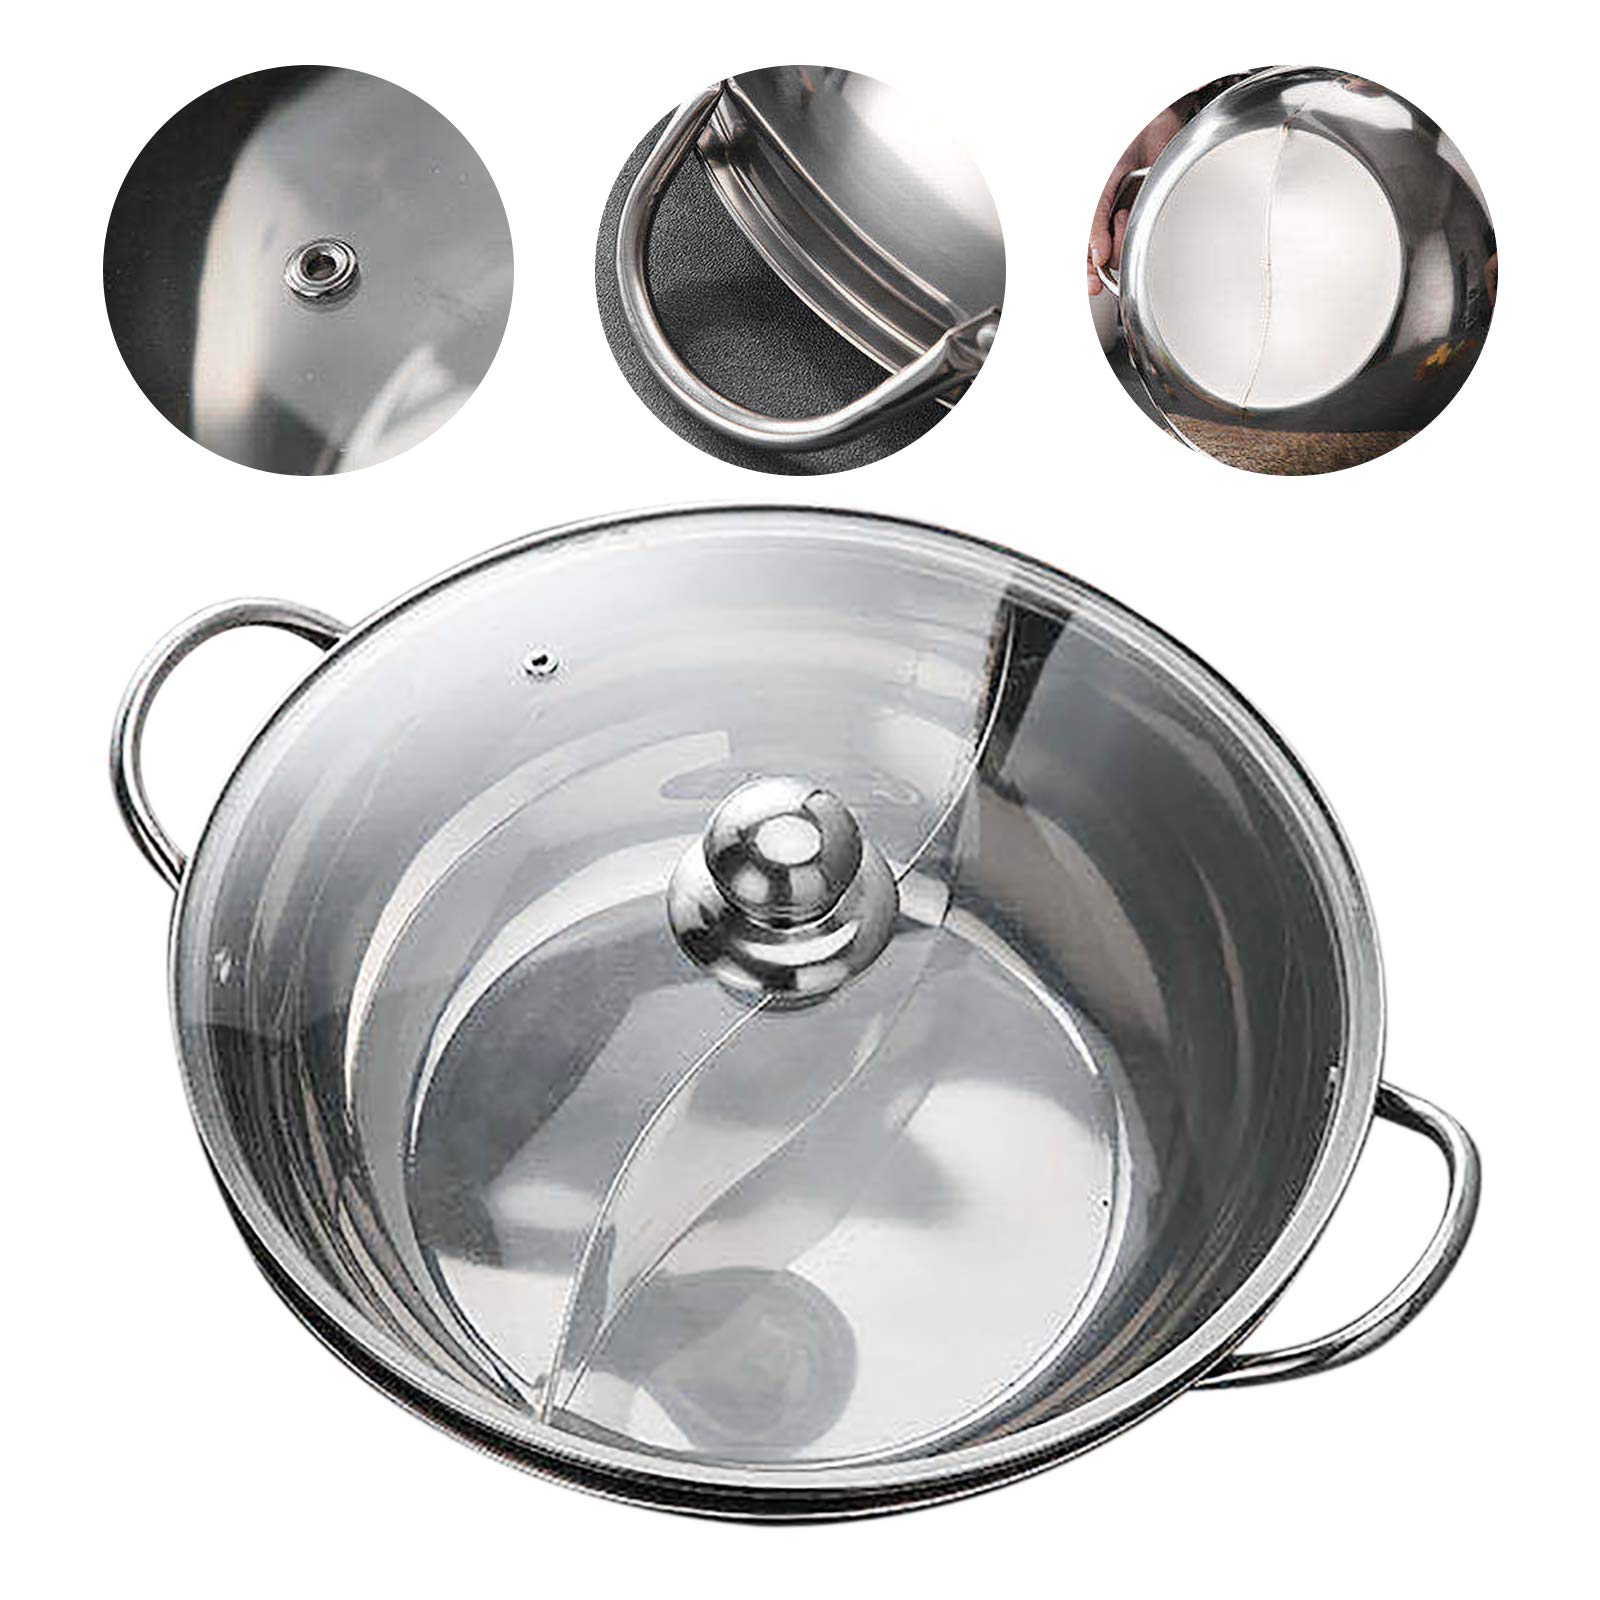 Gdrasuya10 Shabu Hot Pot, 12" Stainless Steel Pot Dual Site Divider with Glass Lid for 2-5 People